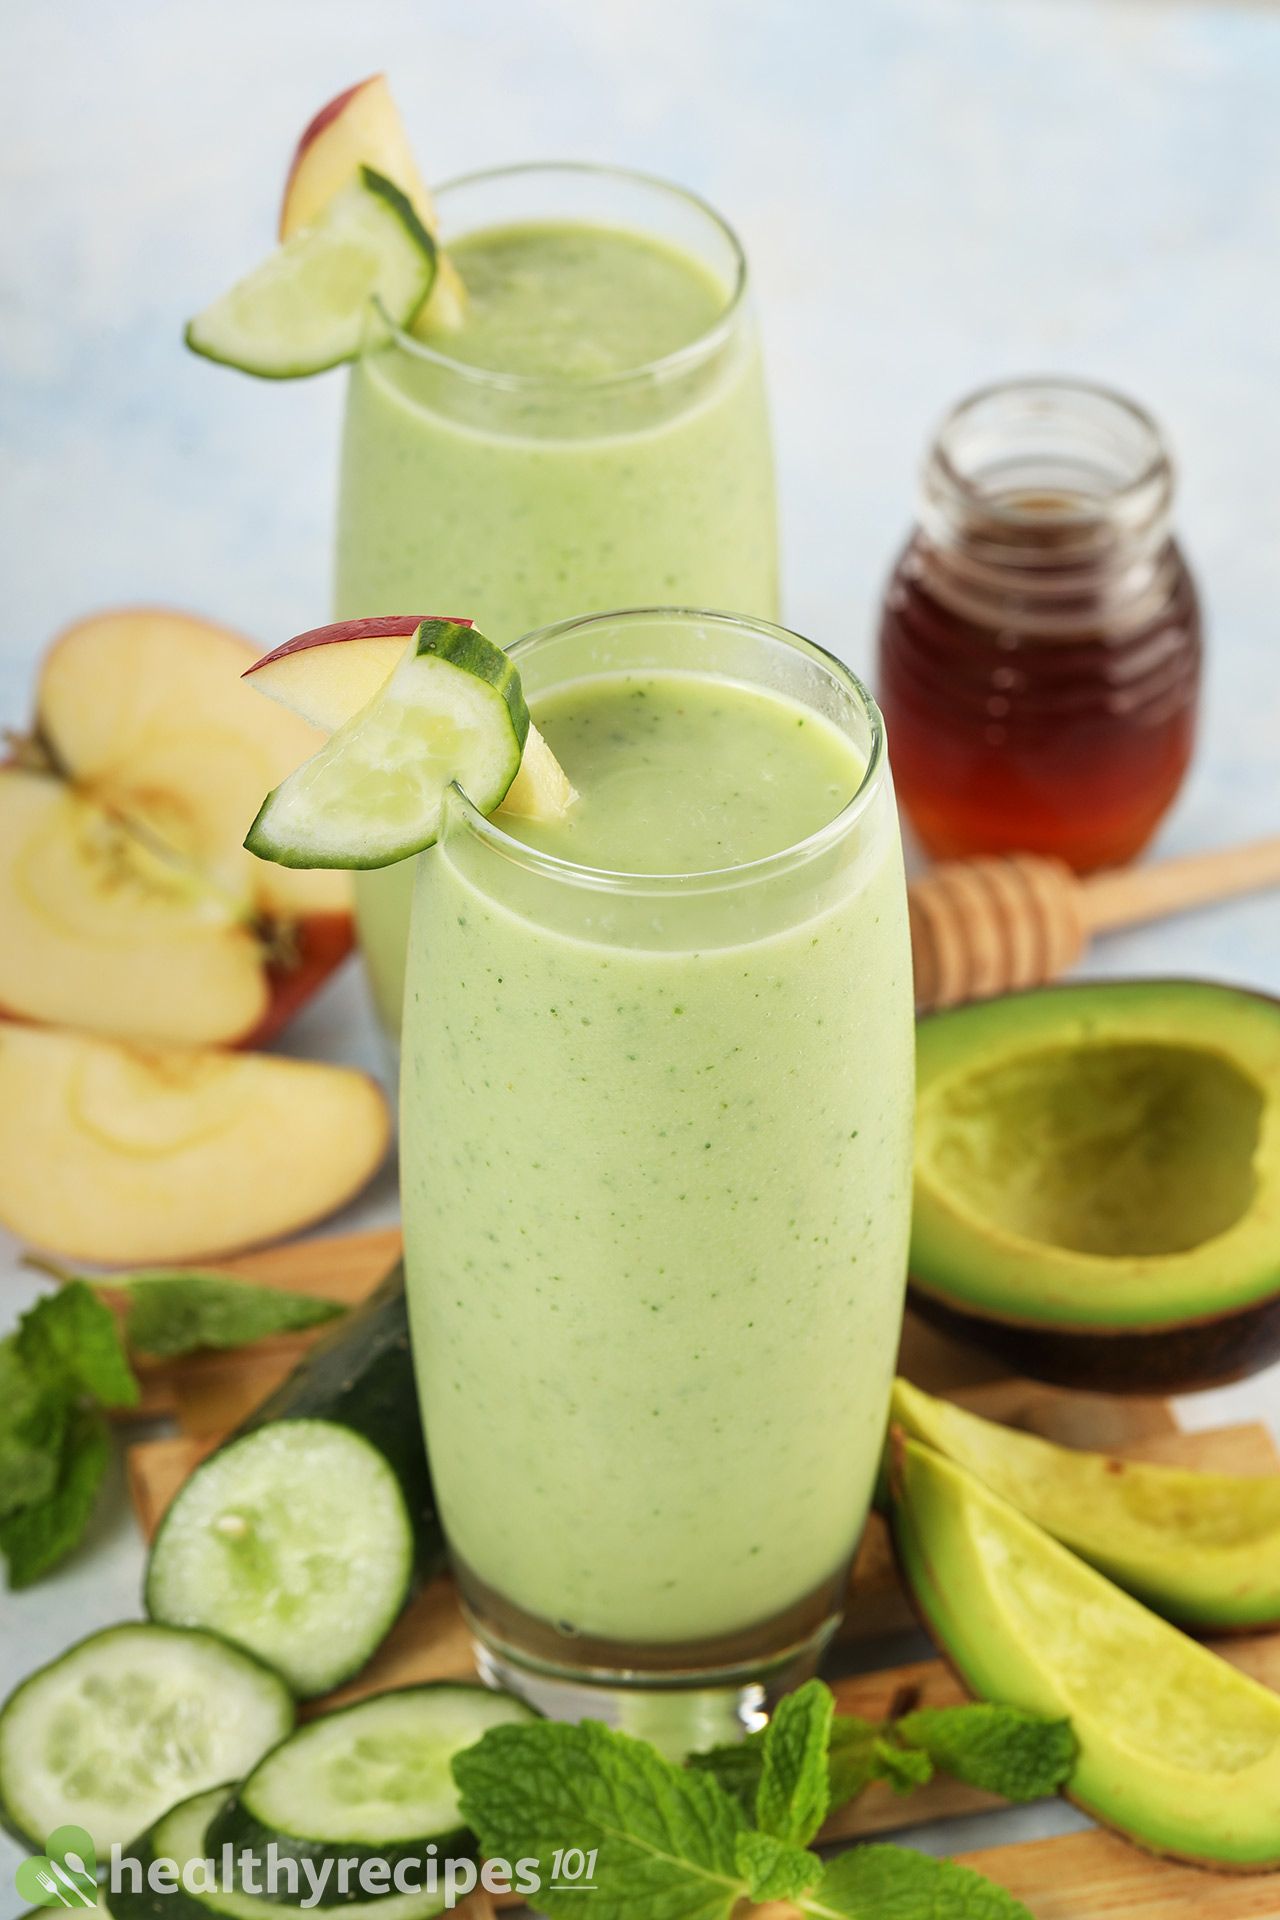 What Goes Well with Cucumber in a Smoothie